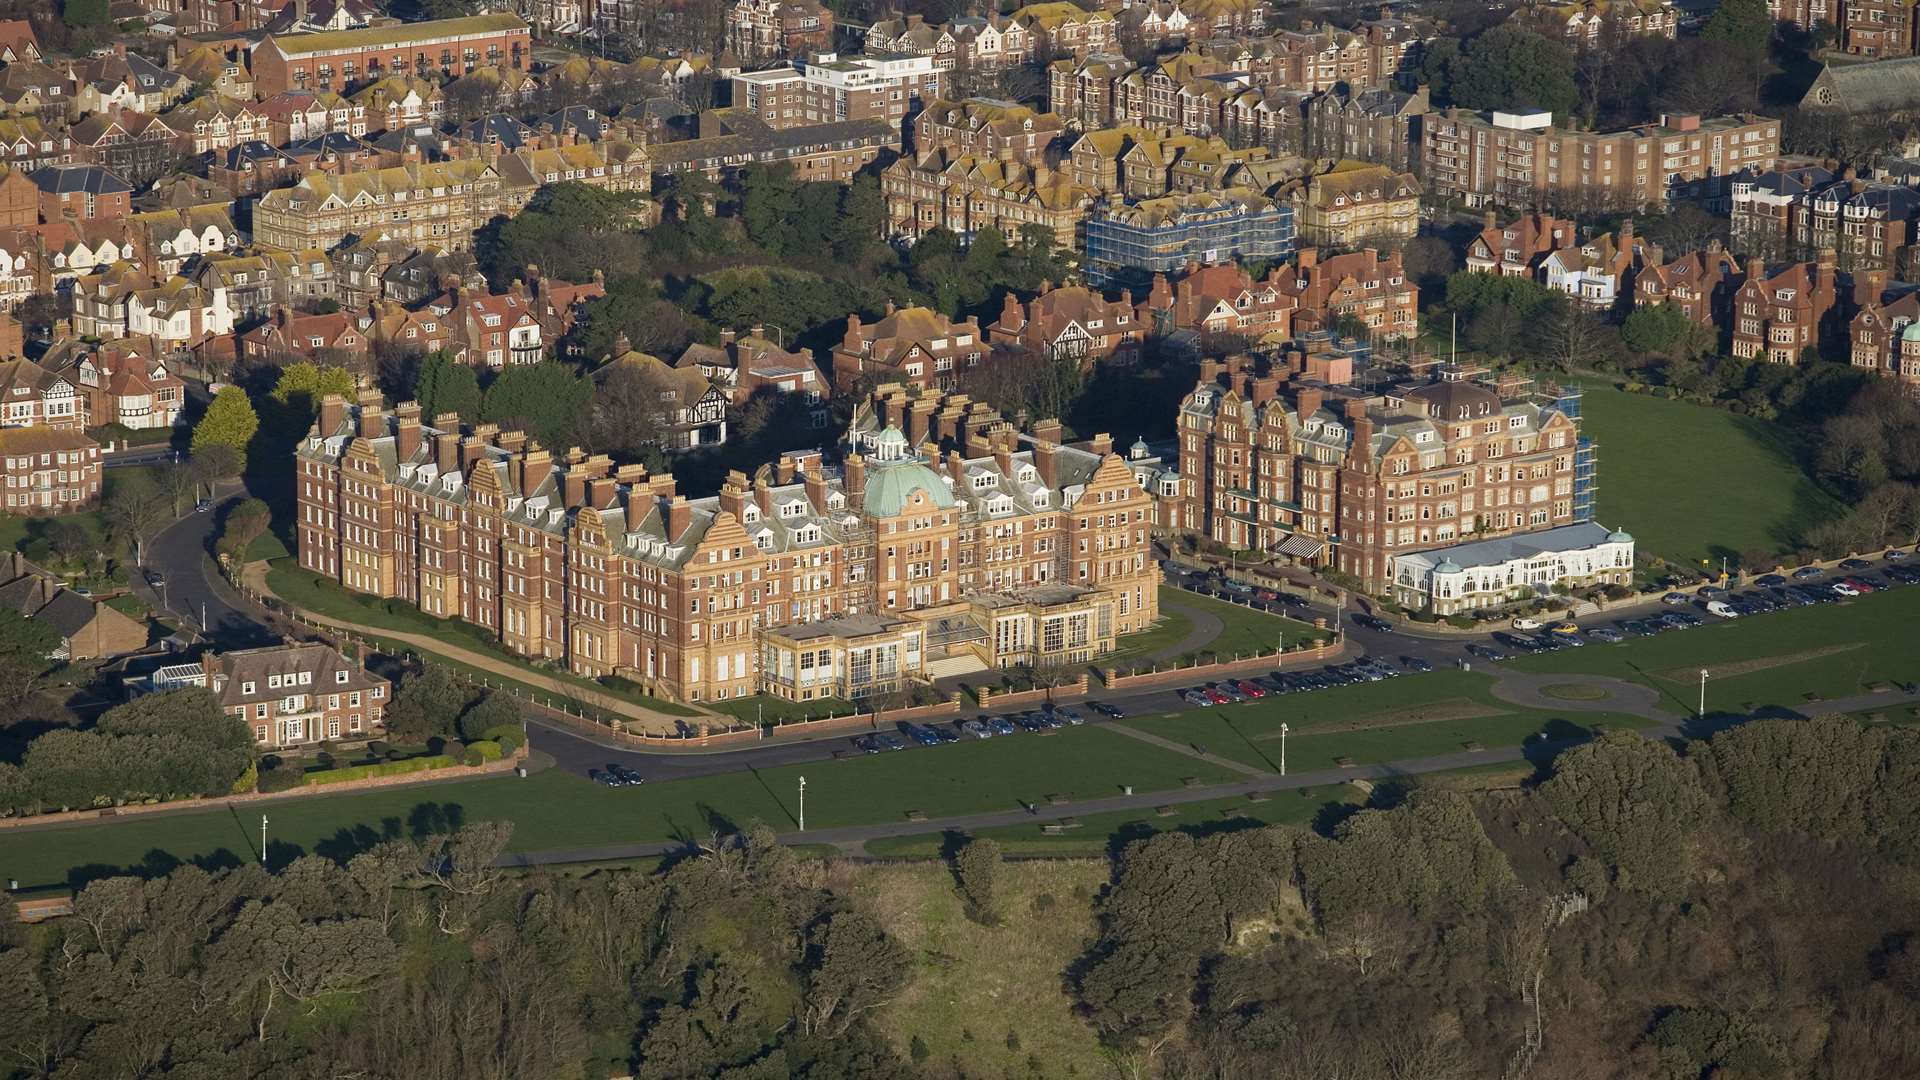 The Grand Hotel, right, sits next to the Metropole on the Leas. Picture: Countrywide Photographic